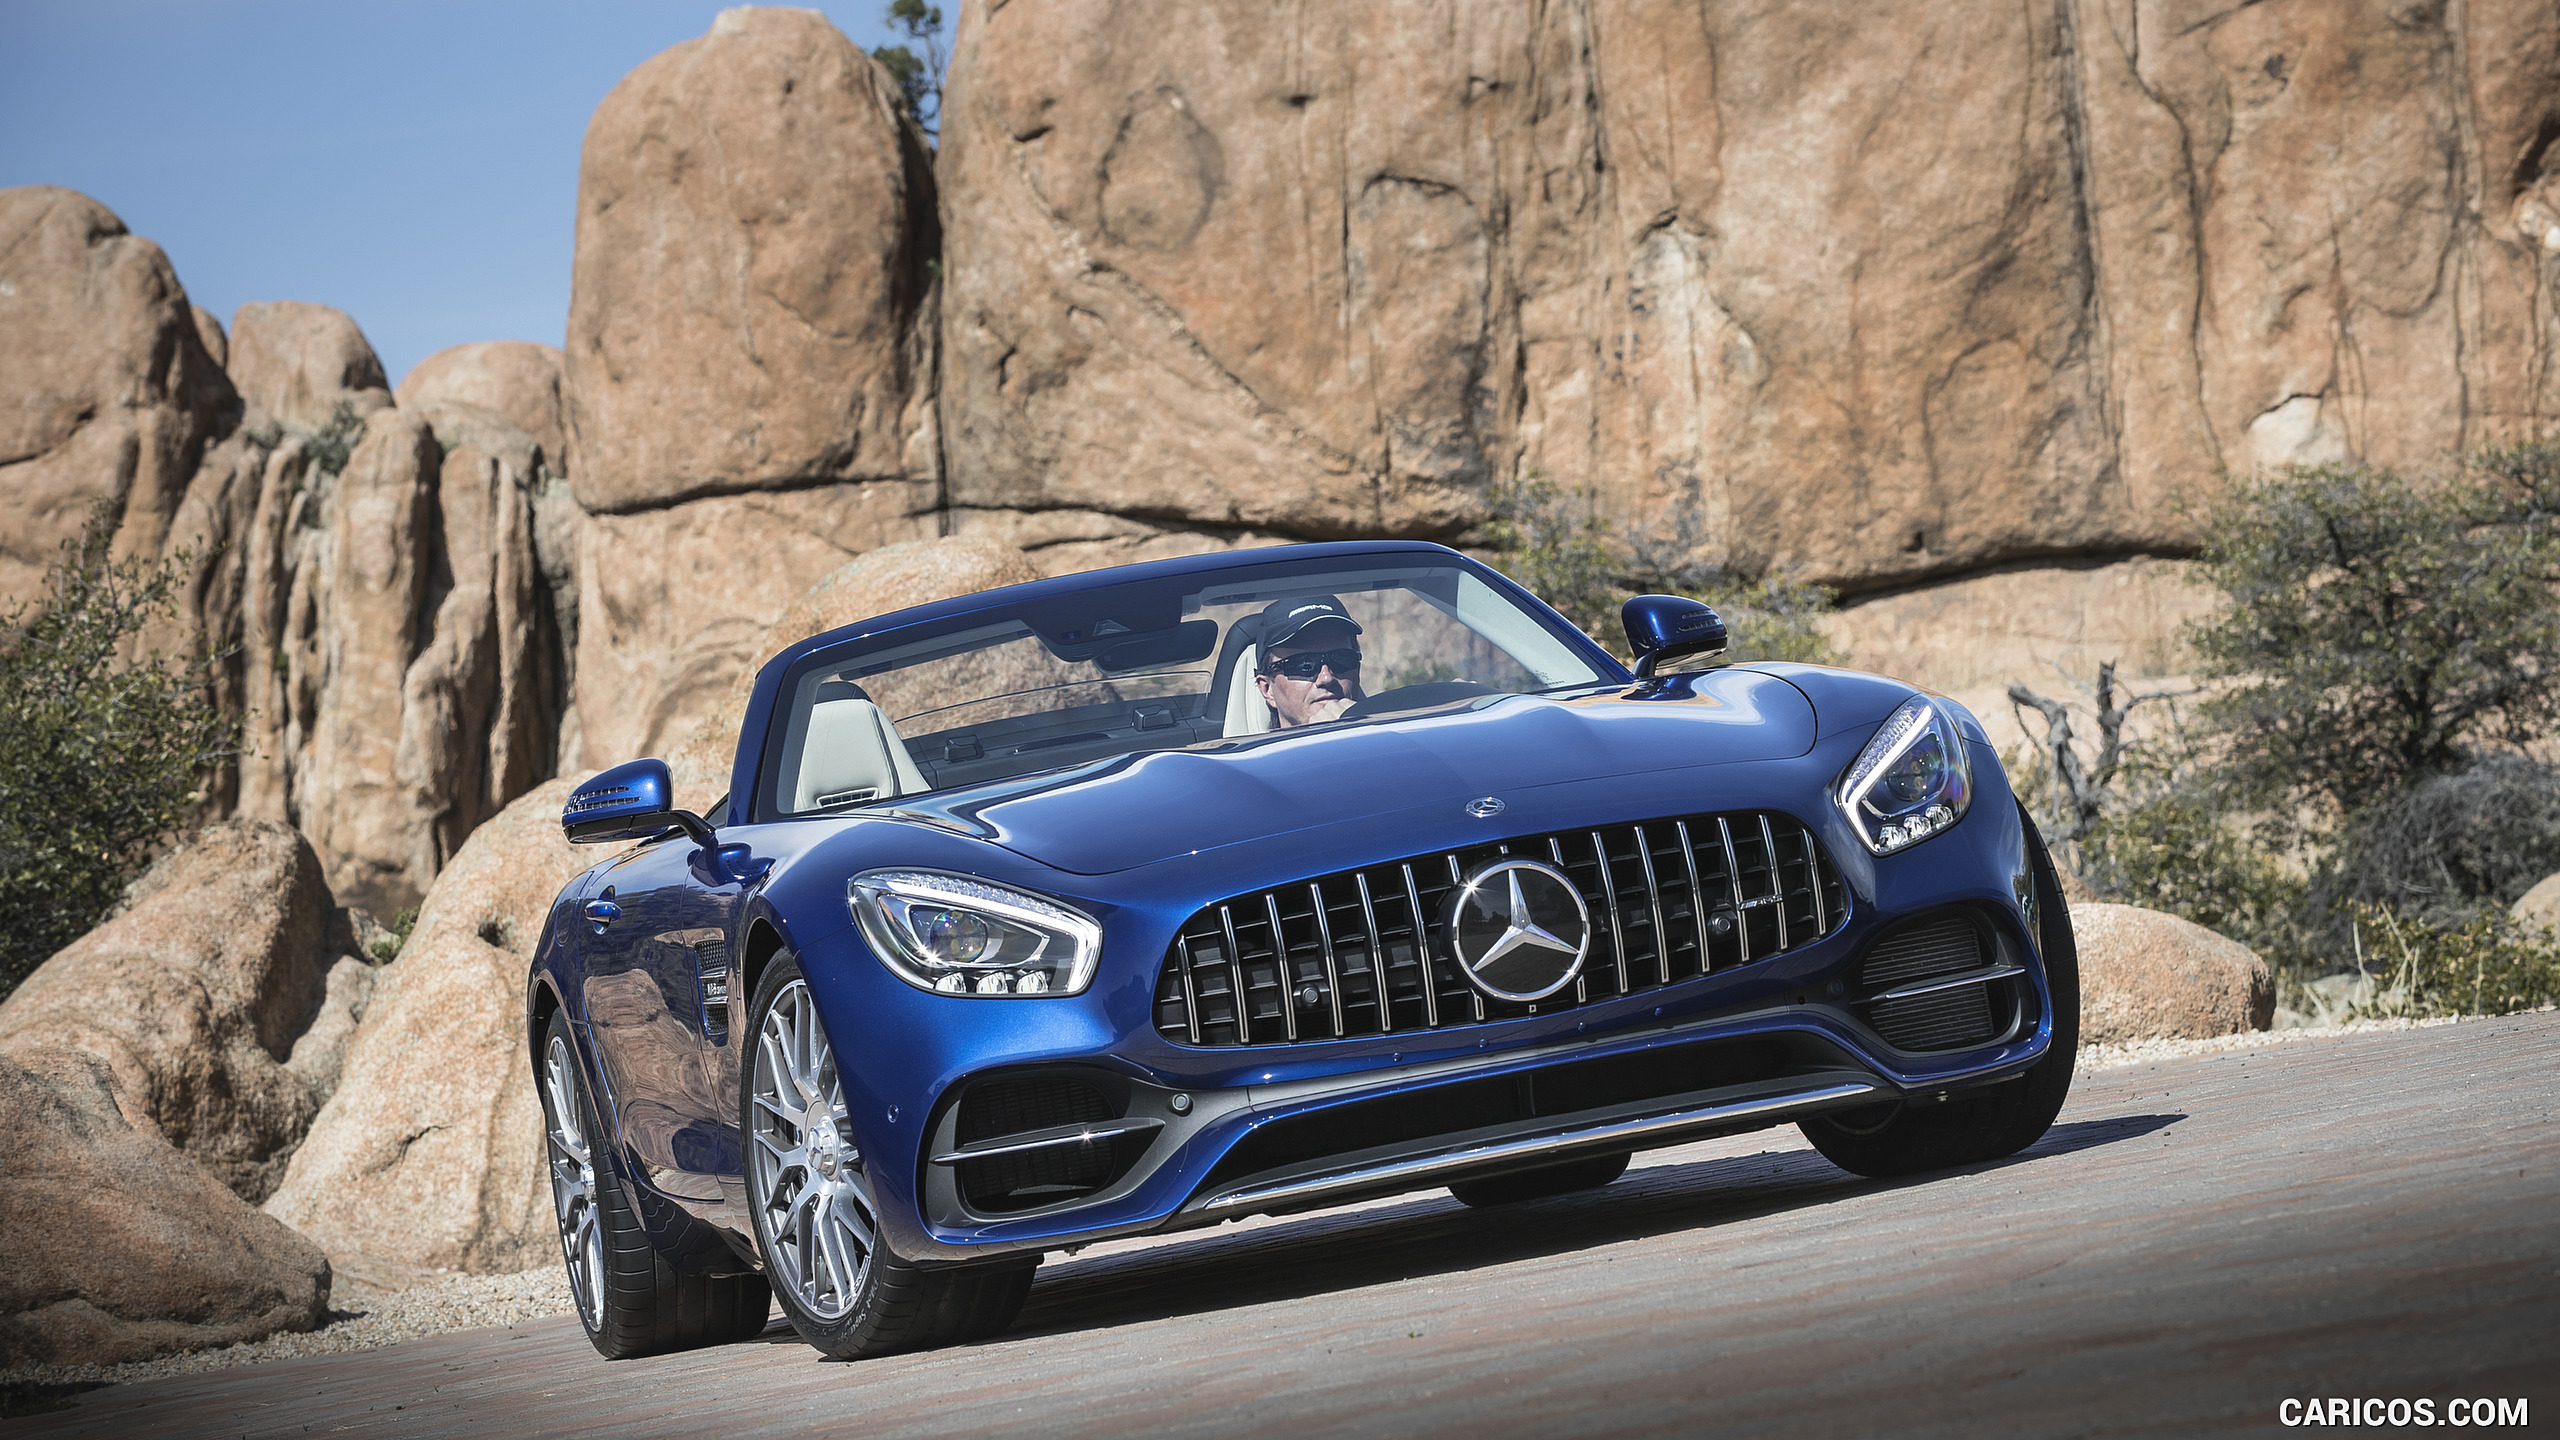 2018 Mercedes-AMG GT Roadster - Front, #142 of 350